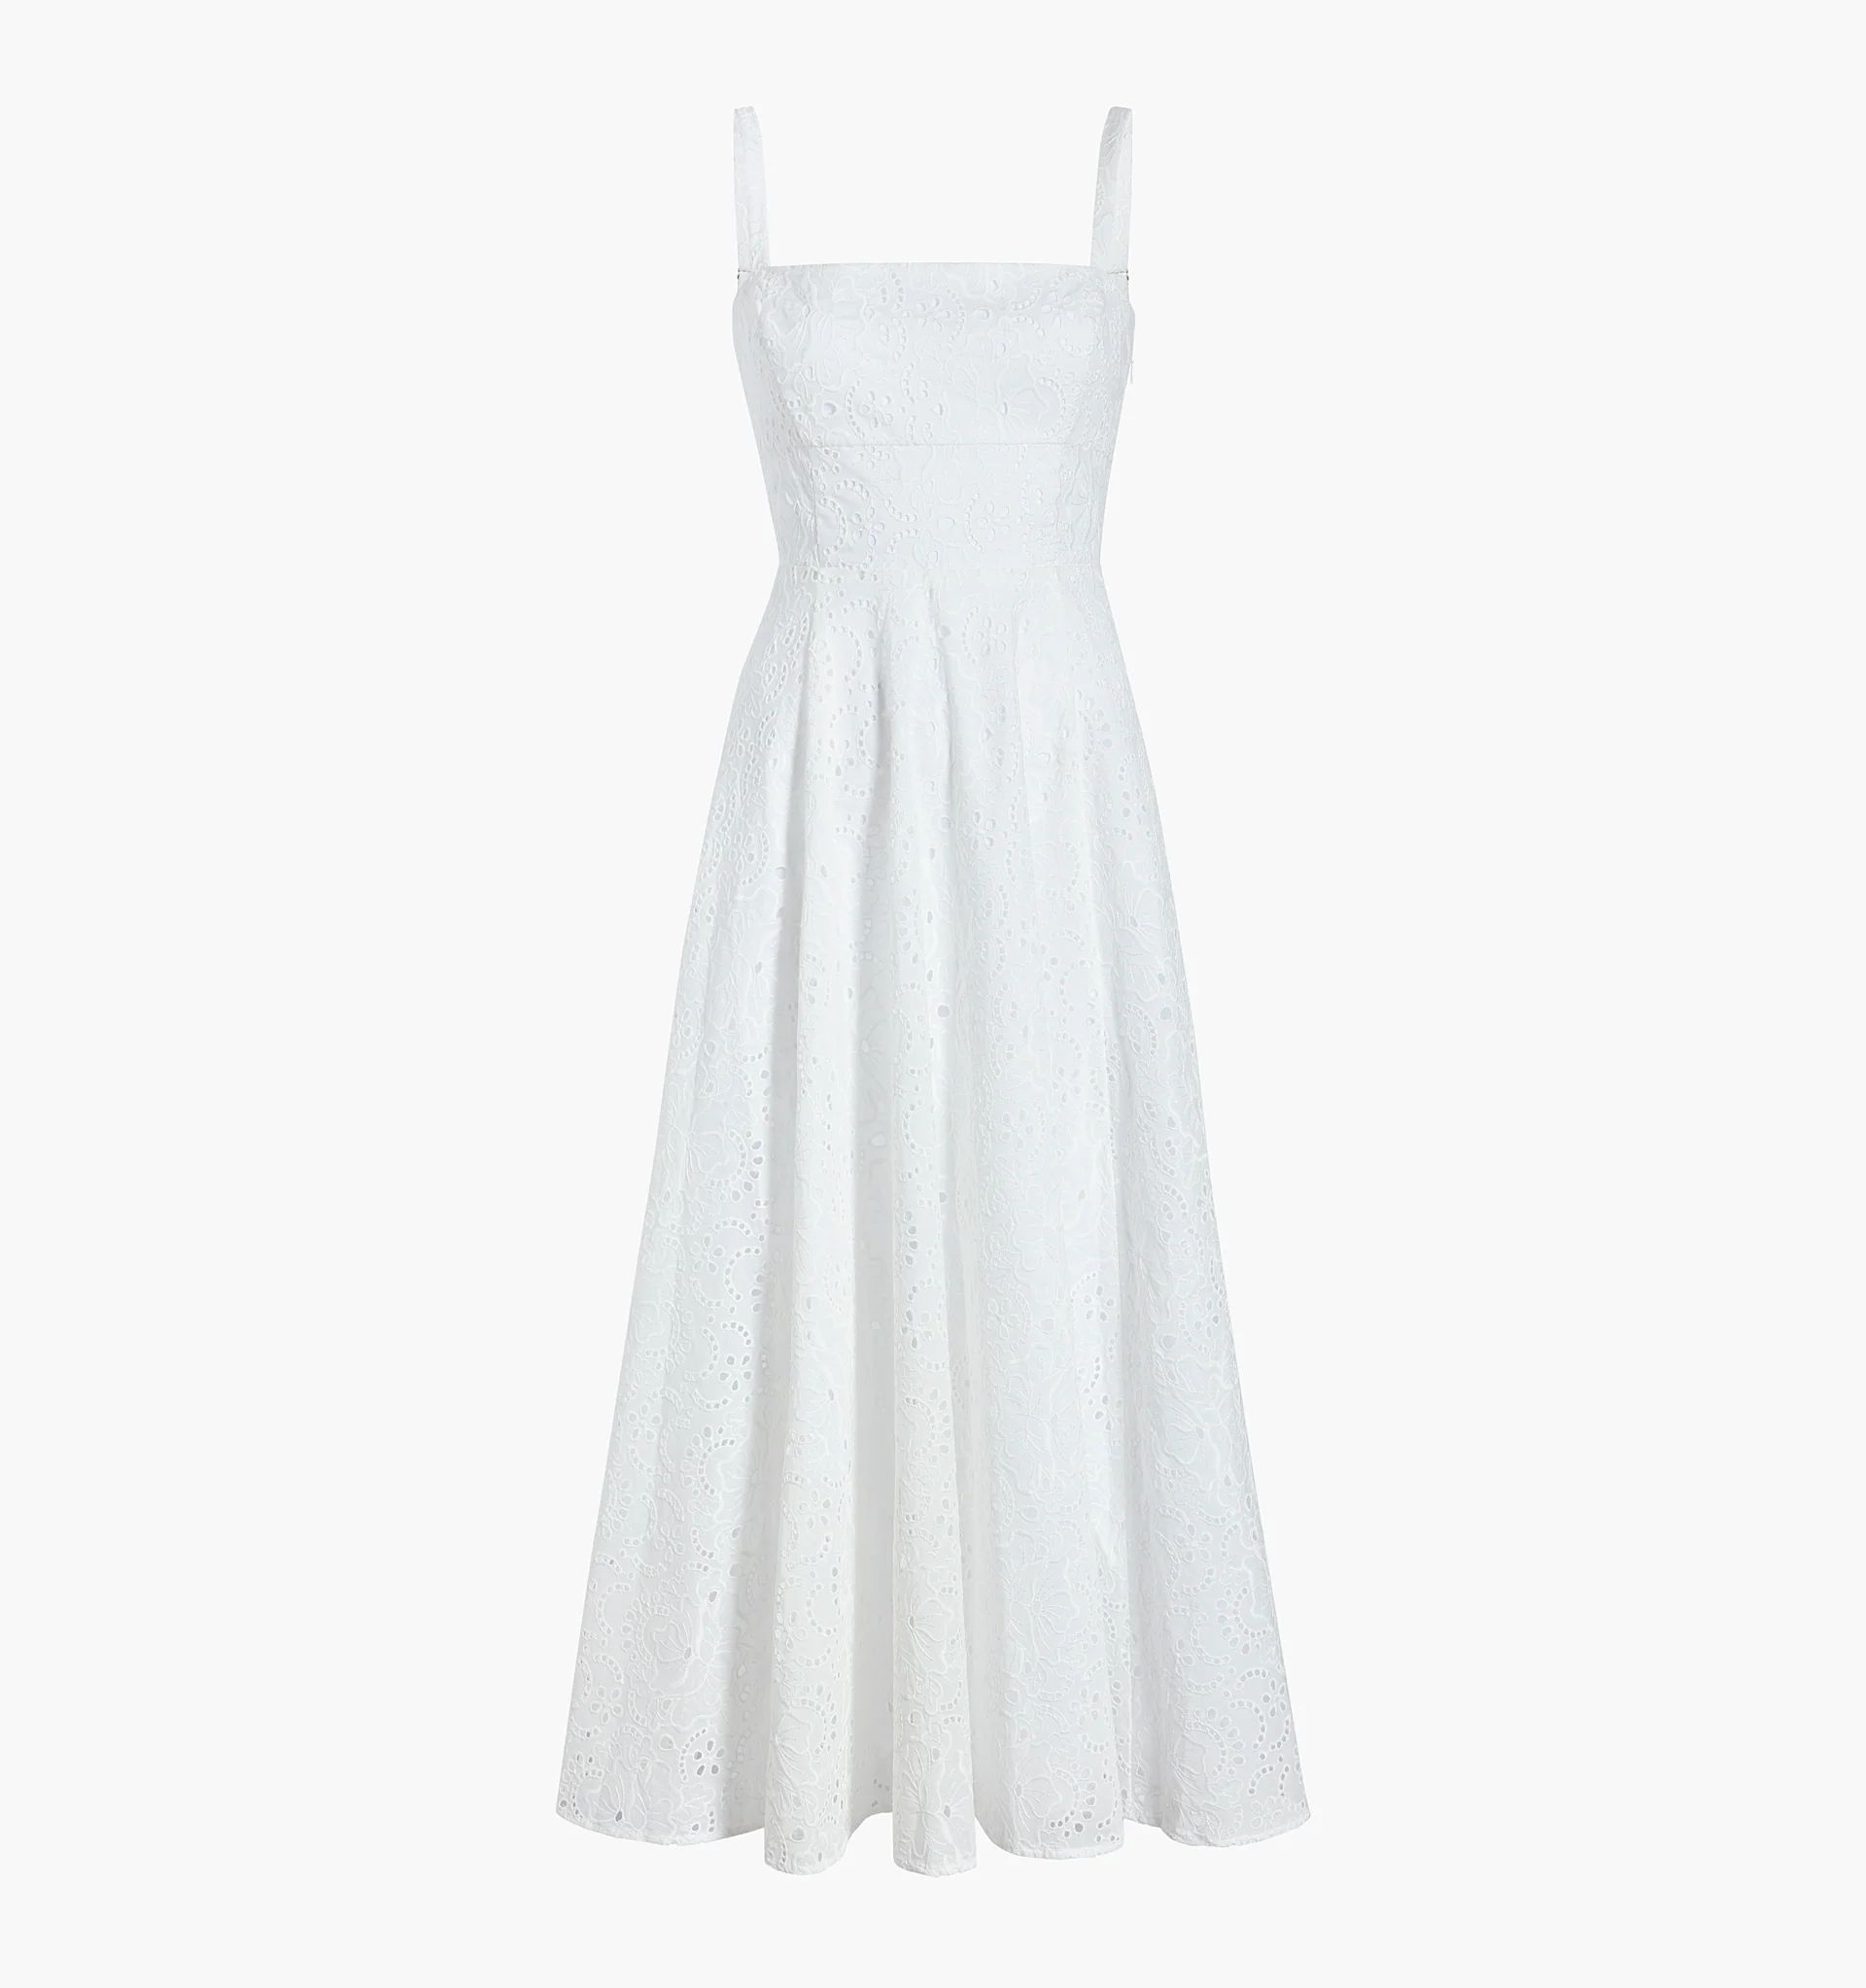 The Margot Dress - White Broderie Anglaise | Hill House Home